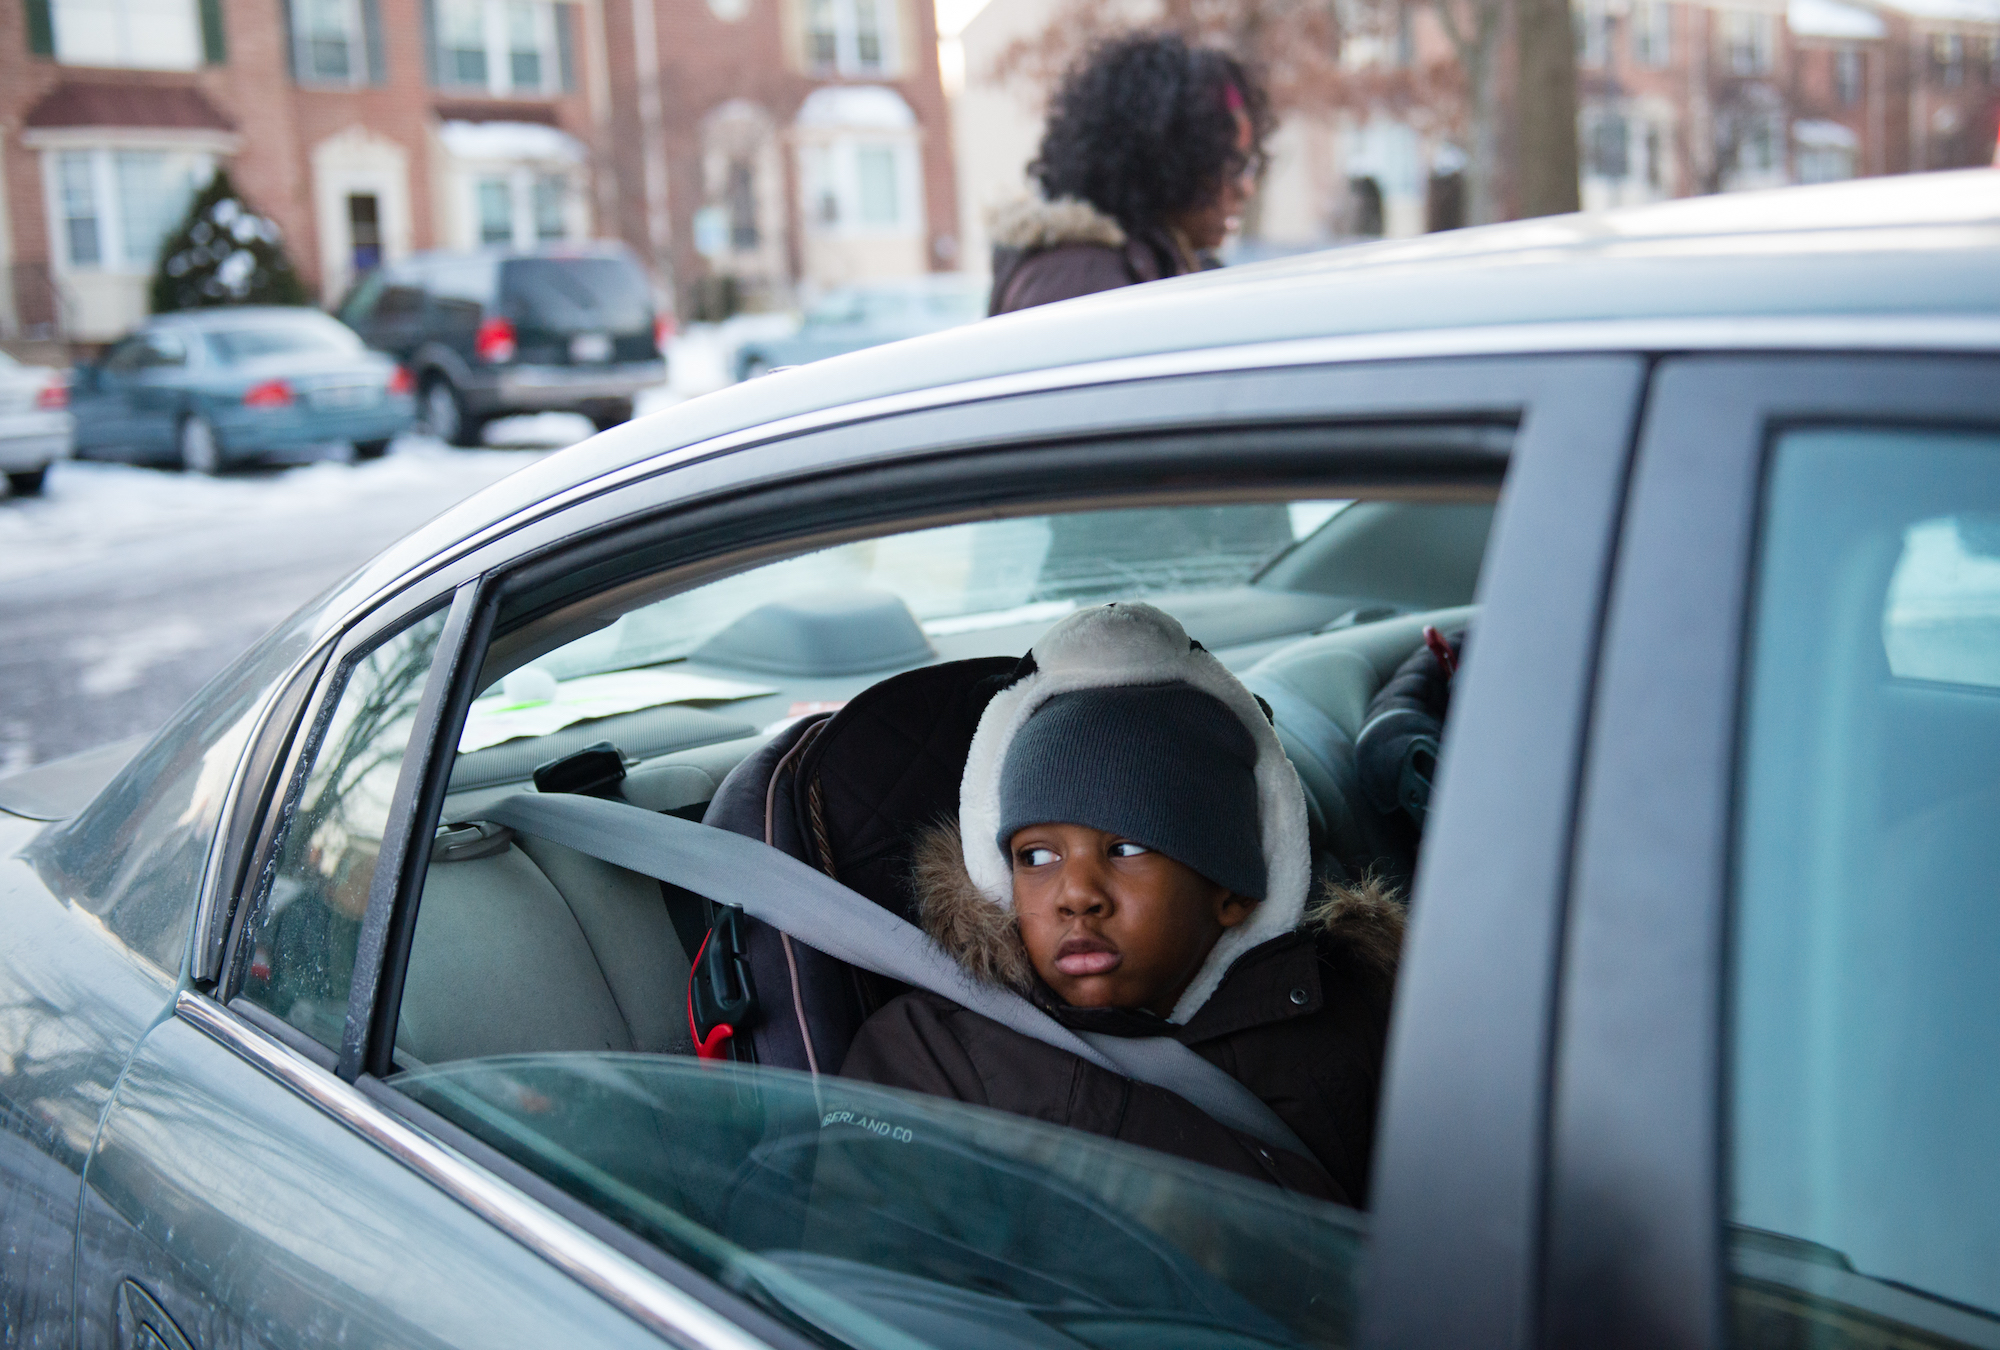 A person looking out of a open car window that may be subject to wind buffeting.